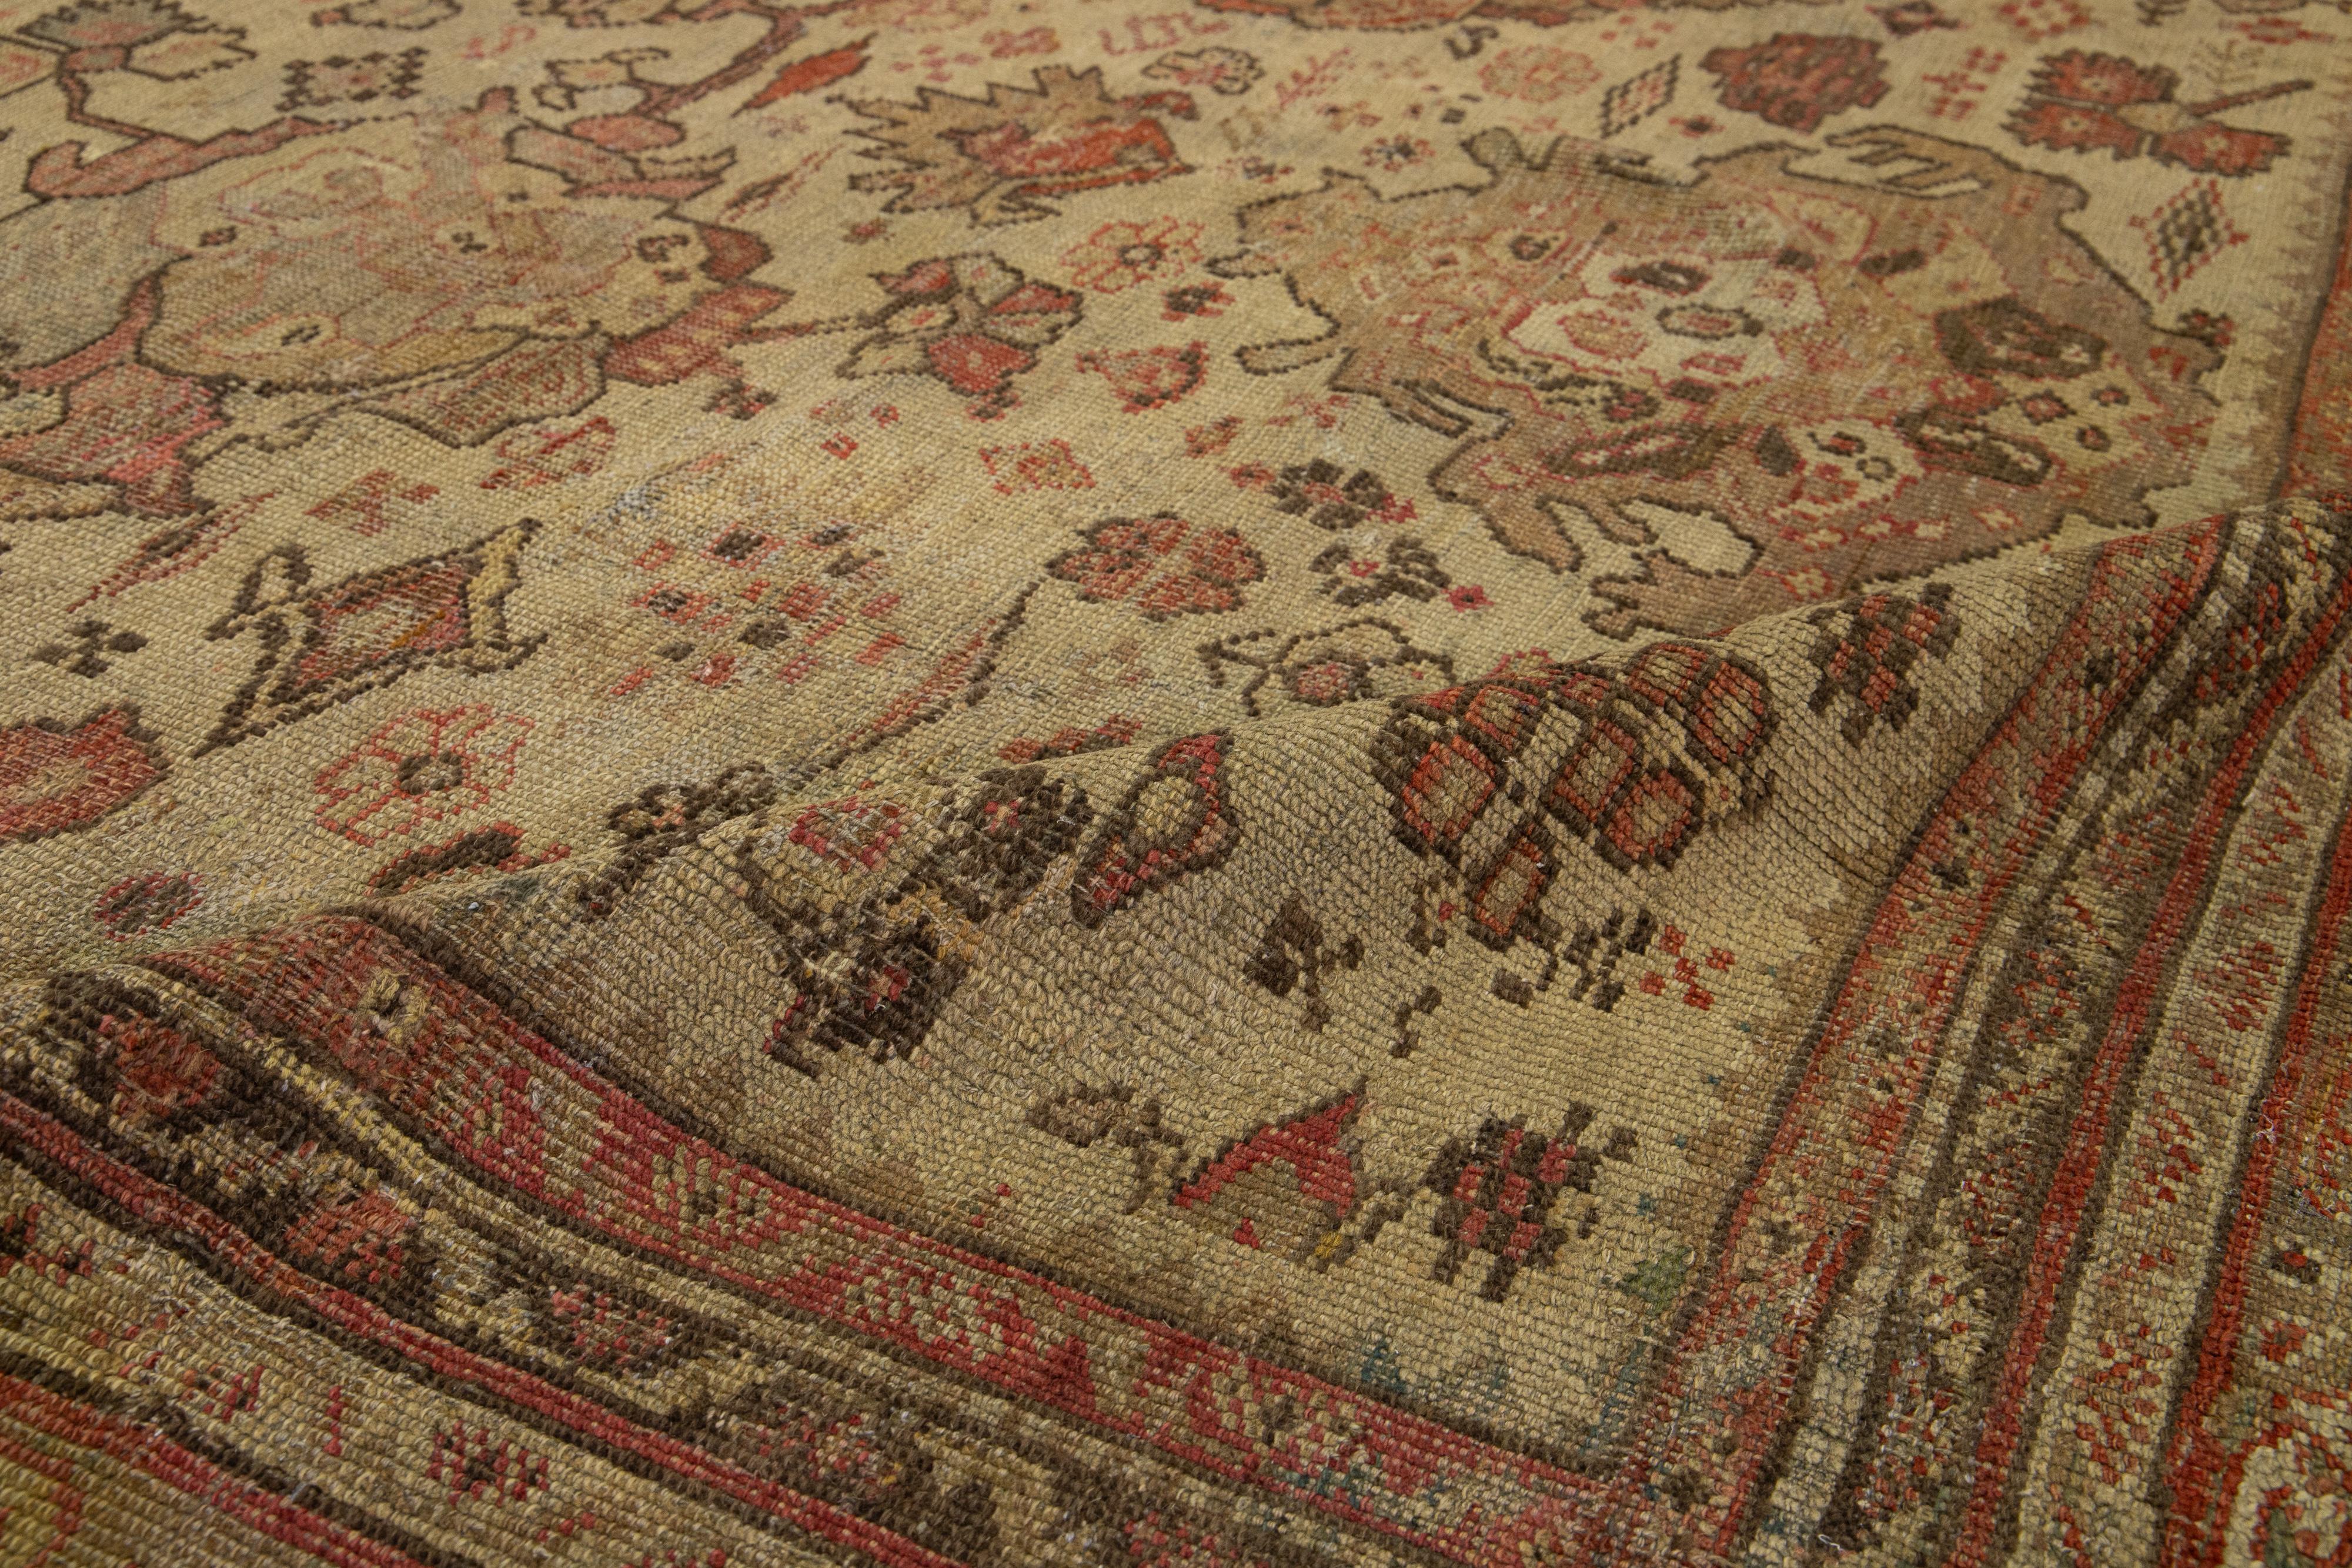 Brown Turkish Antique Oushak Wool Rug with Allover Floral Motif From The 1890's For Sale 4